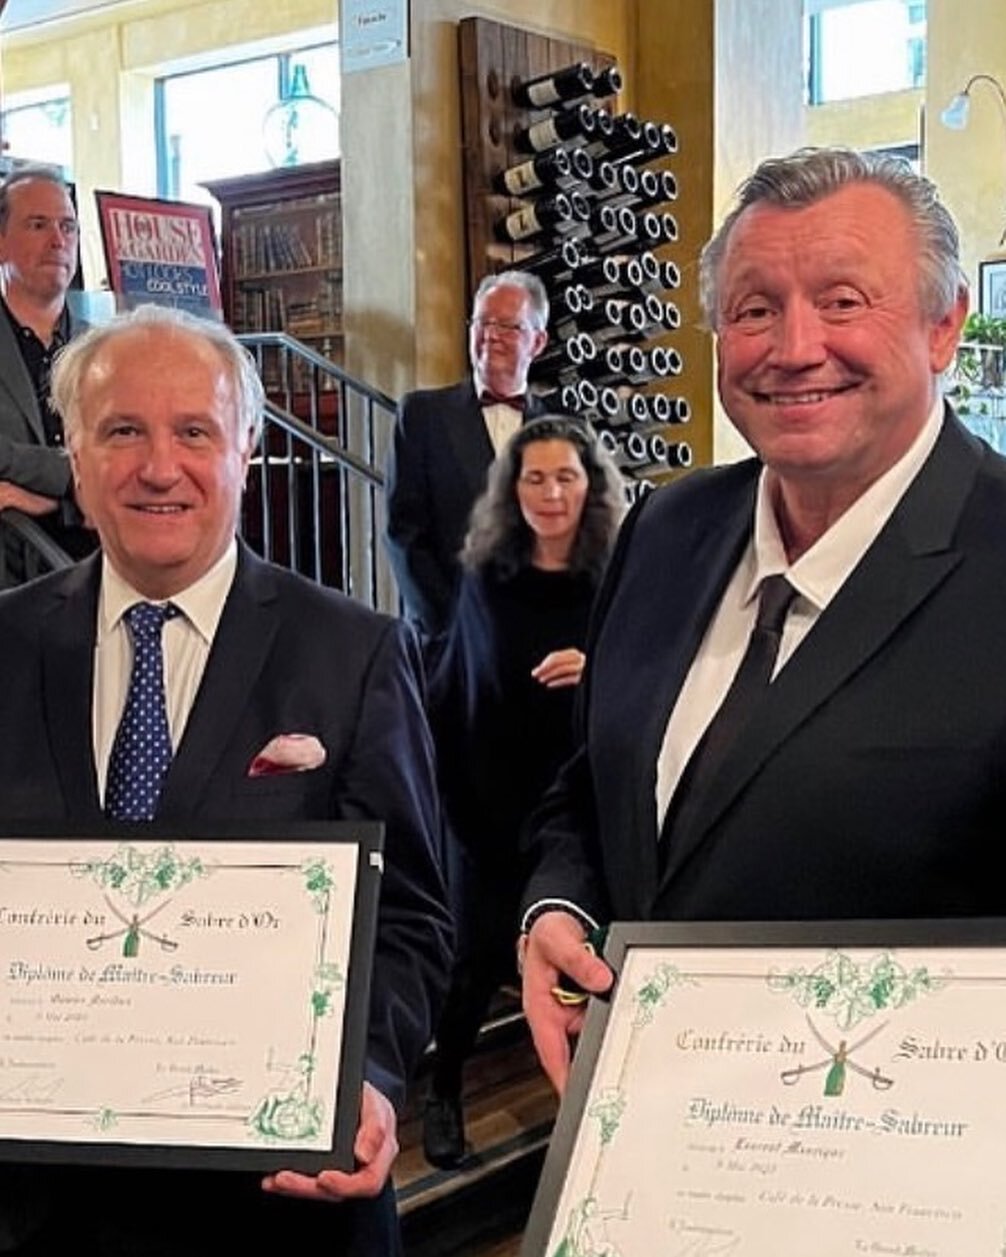 @cafedelapressesf is now the first Caveau of La Confr&eacute;rie du Sabre d&rsquo;or in SF with @champagnelaurentperrier 
@daridonolivier @staveau @naomismithlp 

#champagnelaurentperrier 
#cafedelapresse 
#unionsquare 
#sanfrancisco 
#frenchchampagn